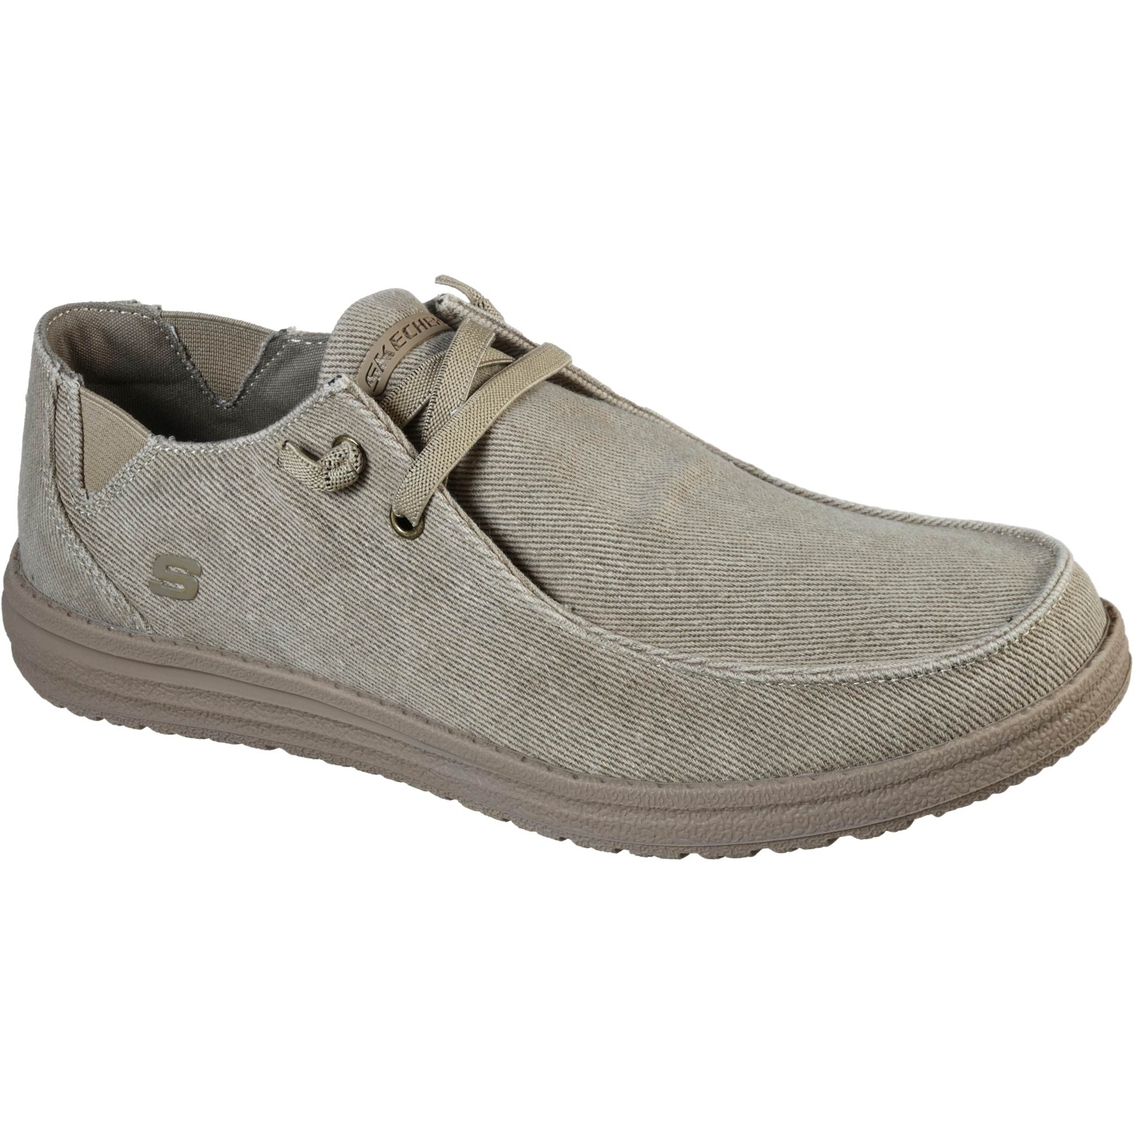 Skechers Men's Melson Raymon Shoes | Casuals | Back To School Shop ...